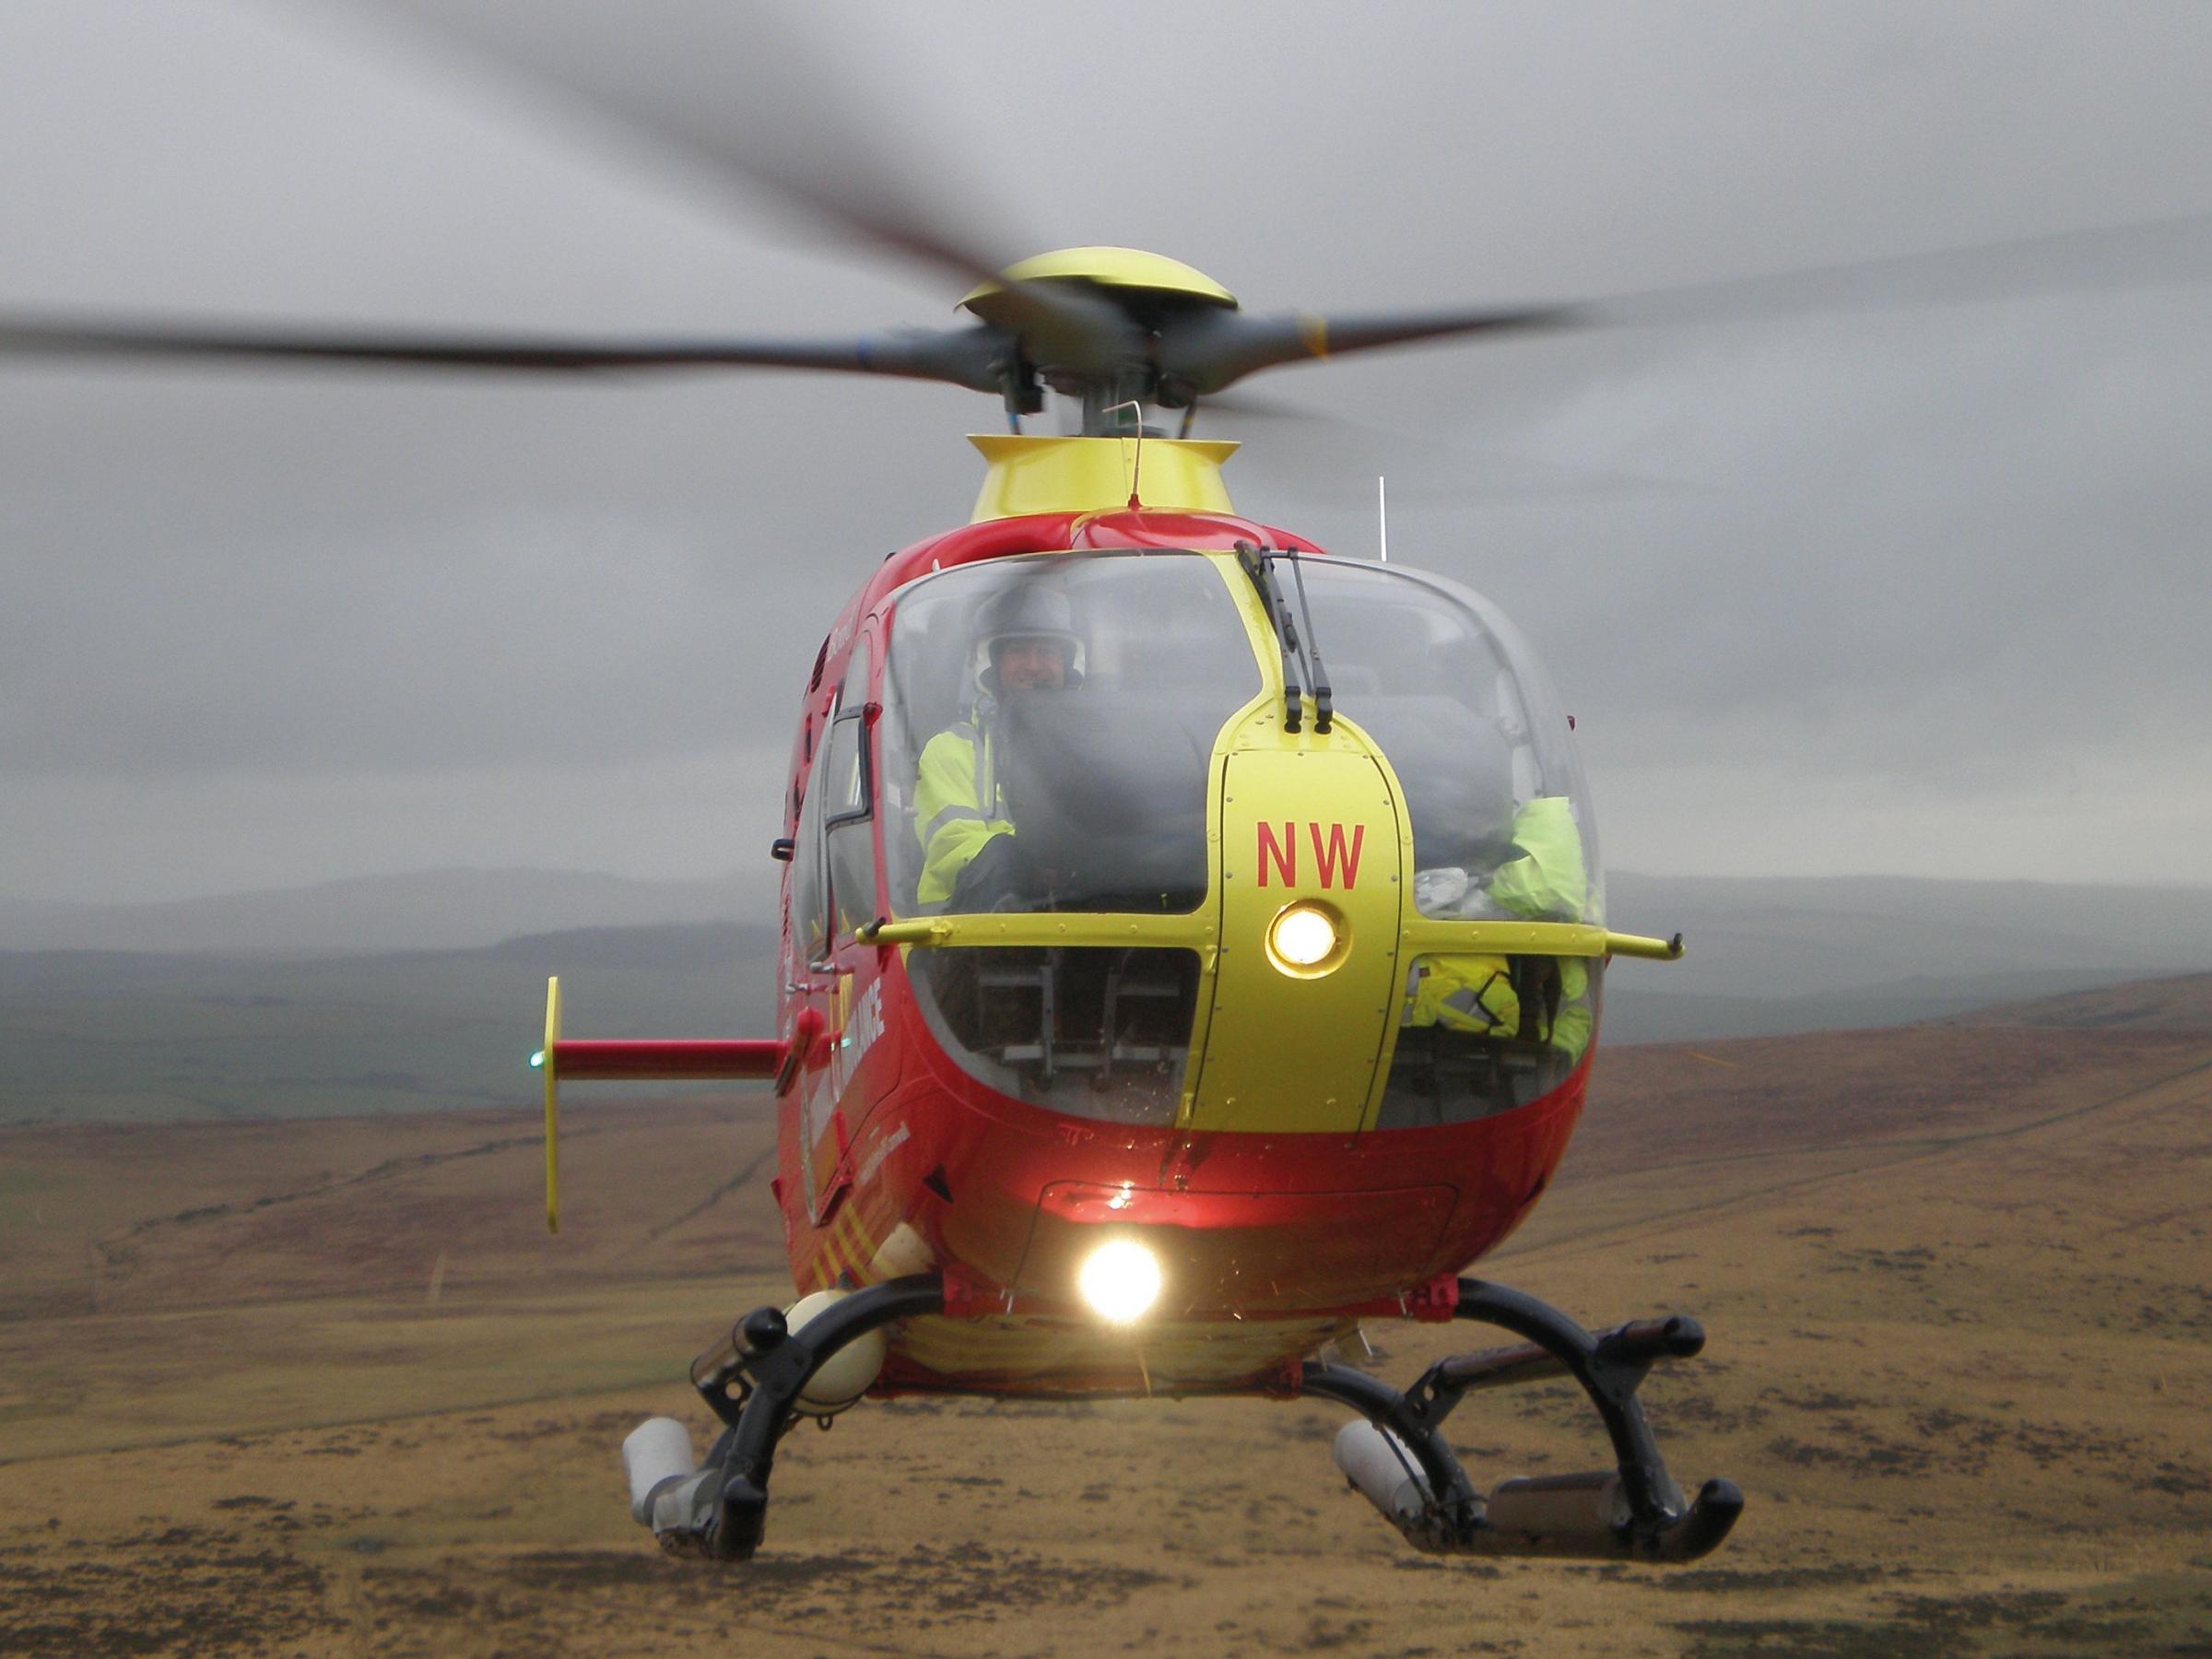 The air ambulance landing in a remote location